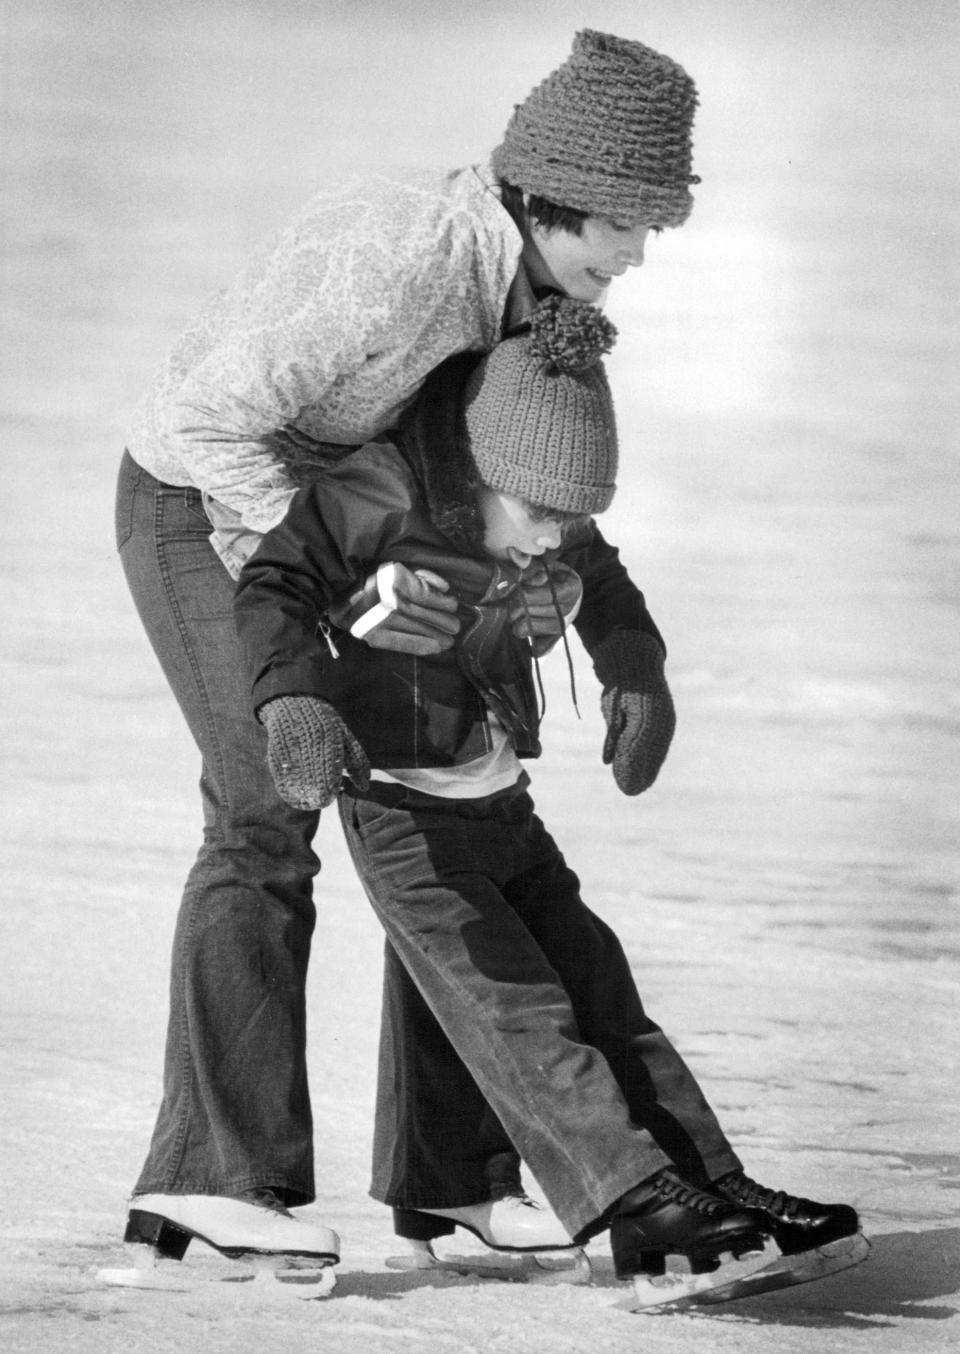 Nancy Curtis helps Trent Culbertson, 5, stand up as he learns to skate for the first time in 1979